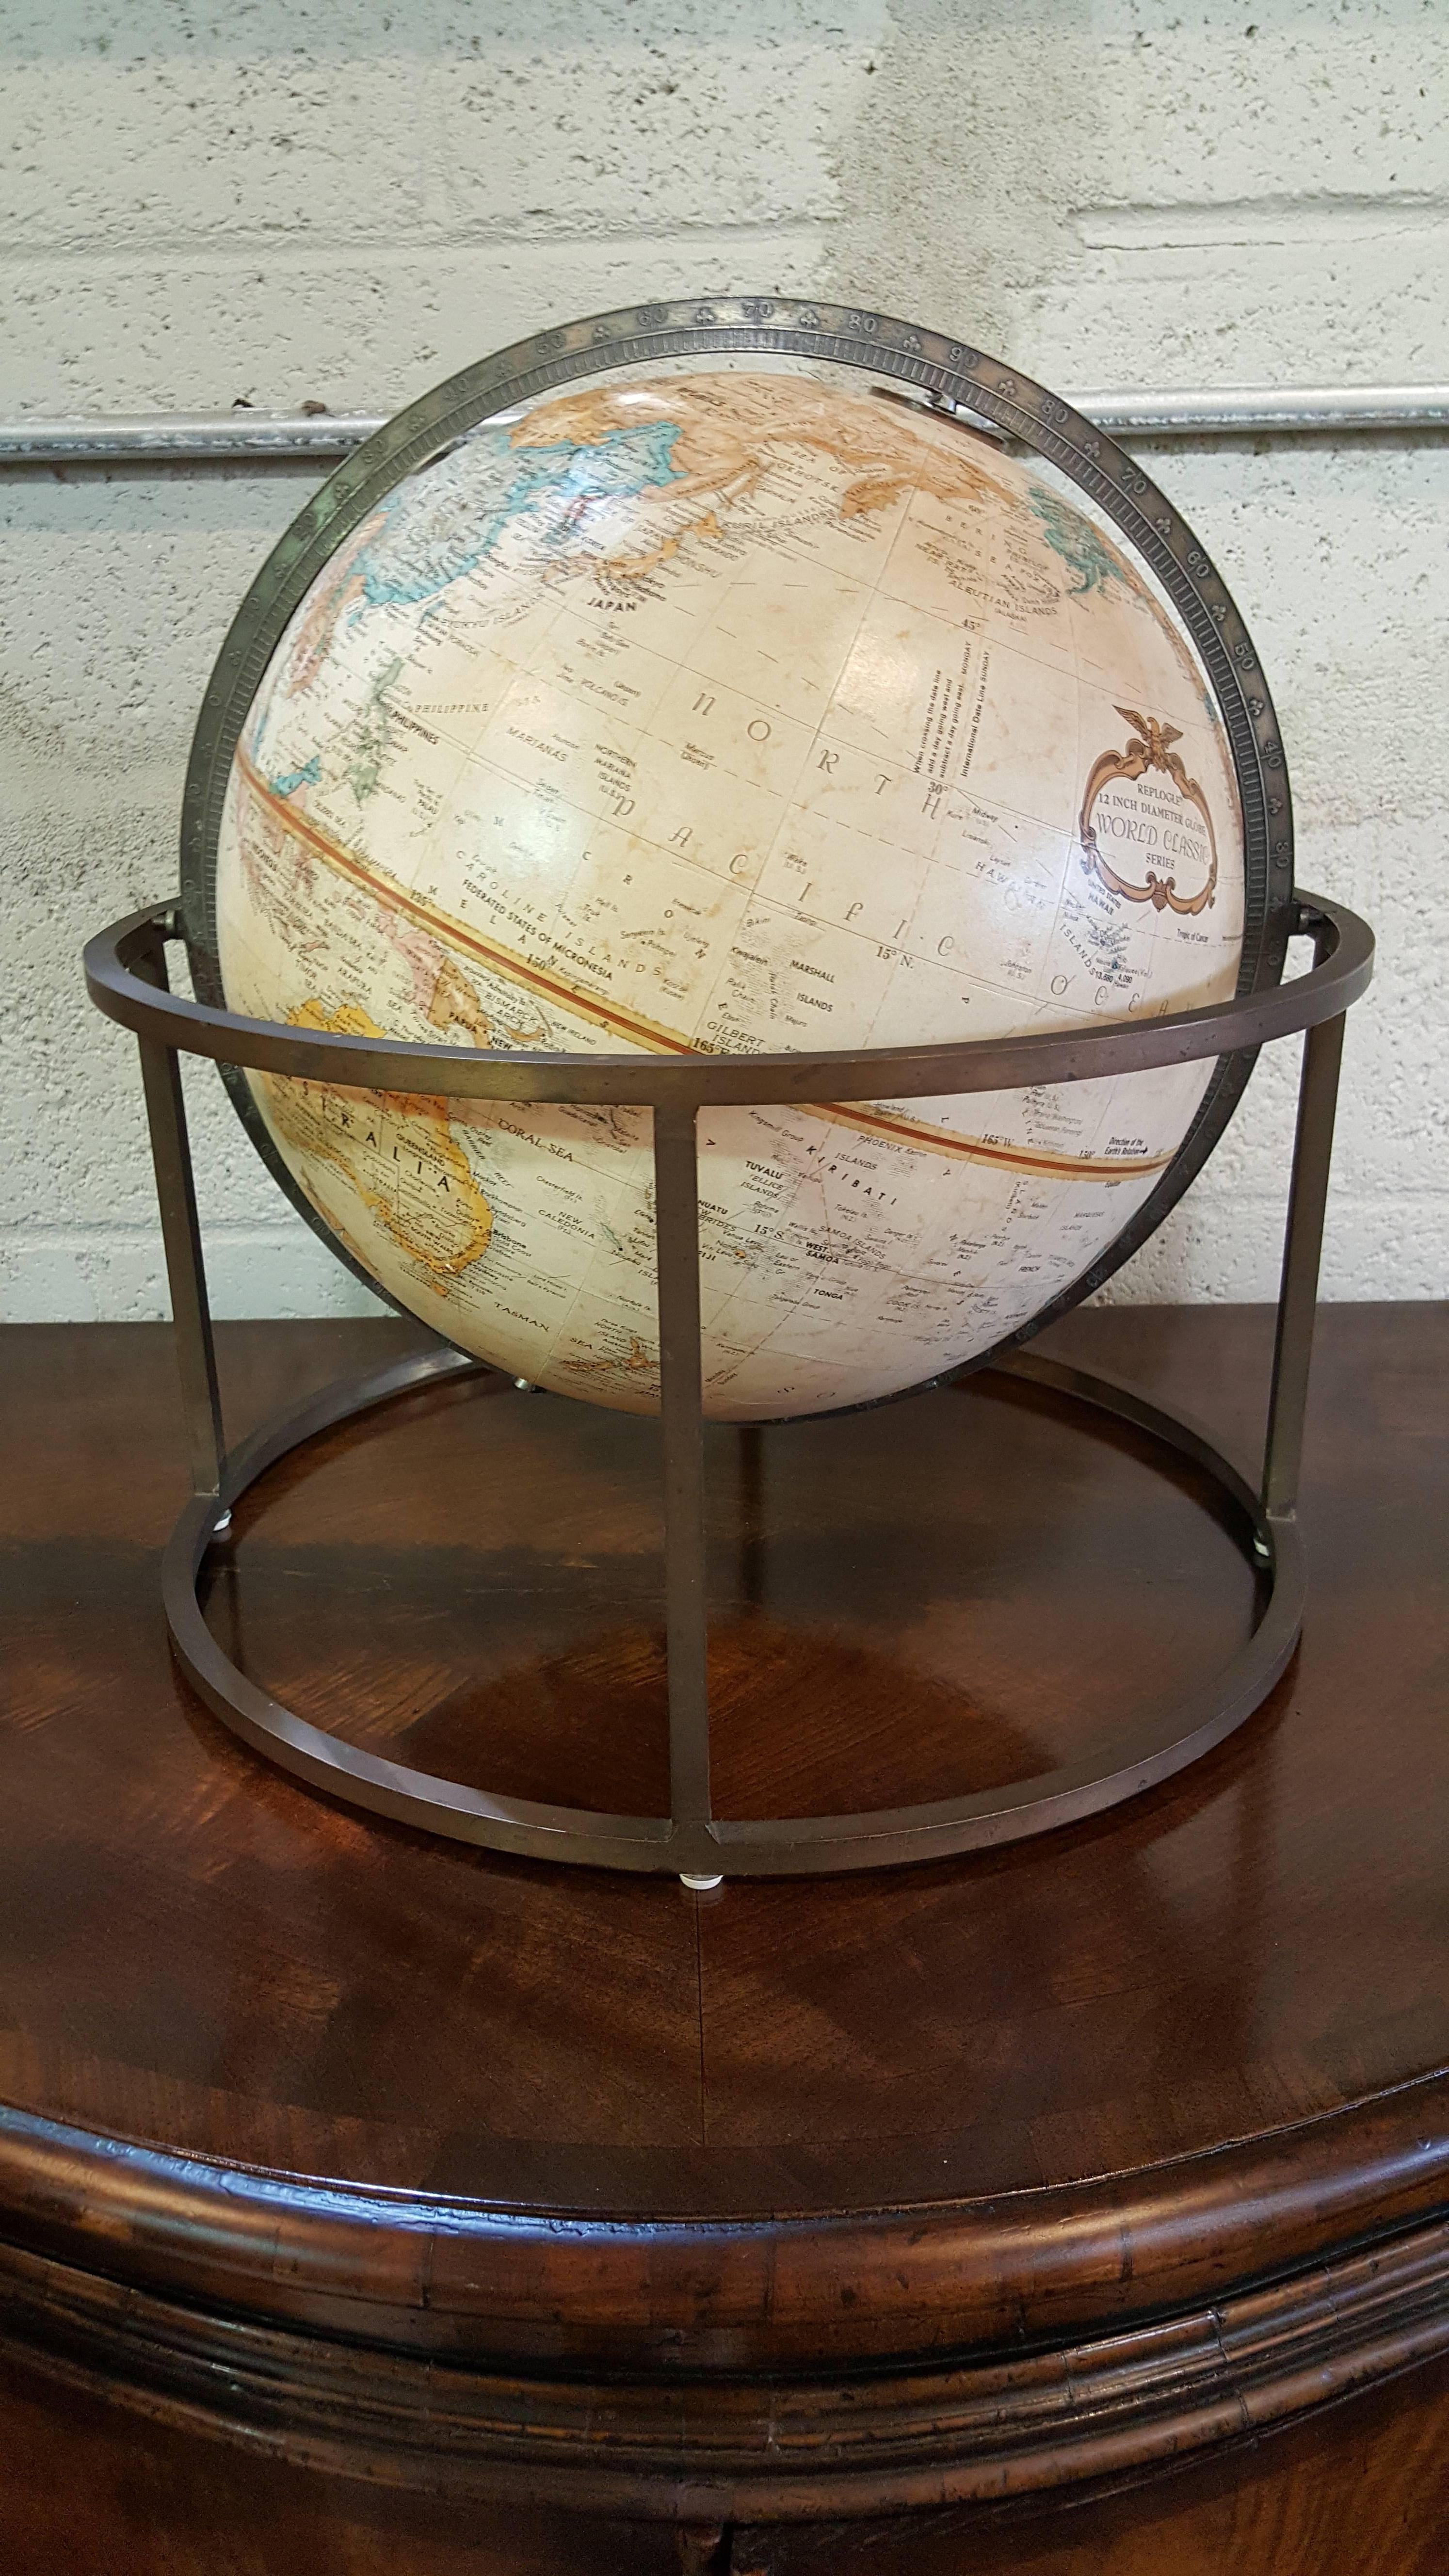 Tabletop world globe with square tubular brass stand by Replogle.
Attributed to Paul McCobb, circa 1960s. Nice patina to metal base, globe in excellent condition.